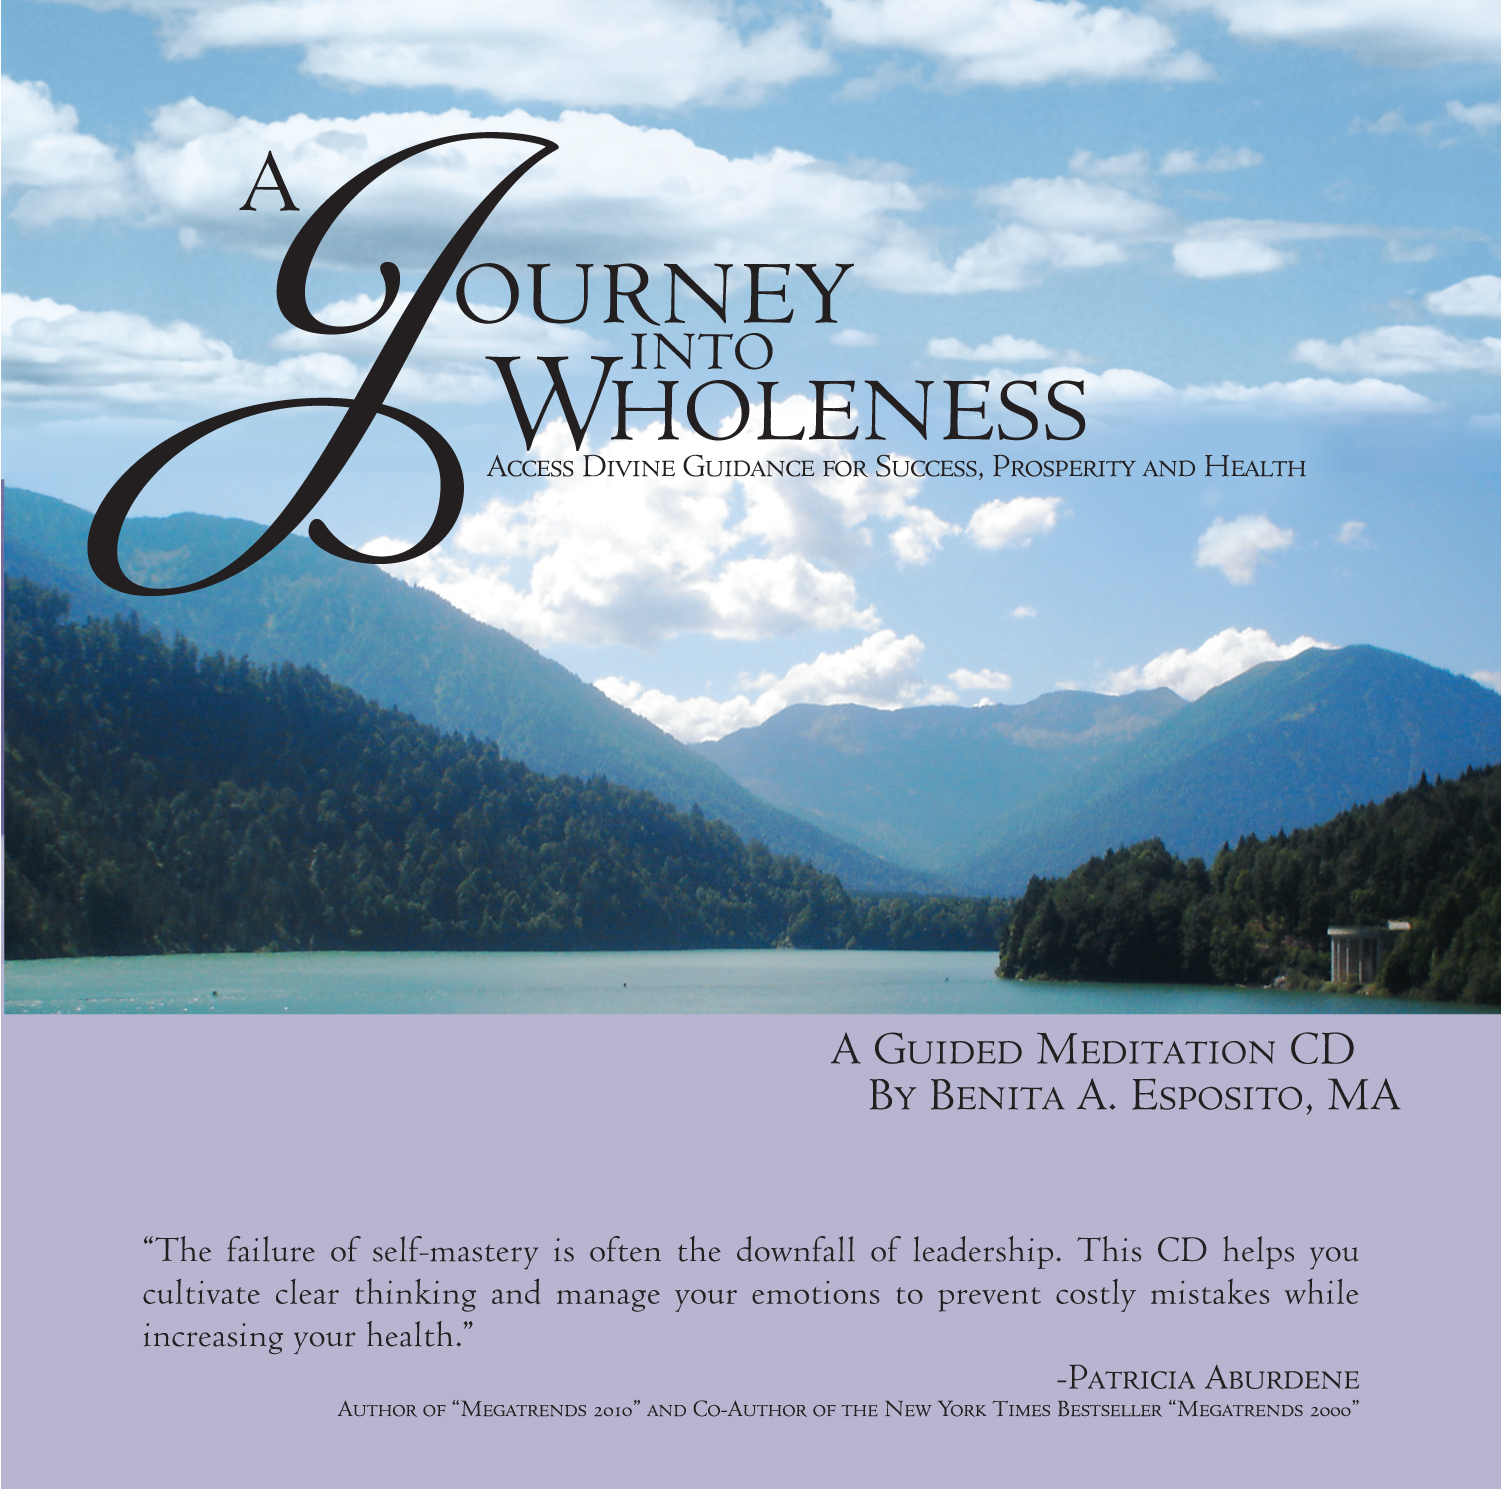 my journey to wholeness